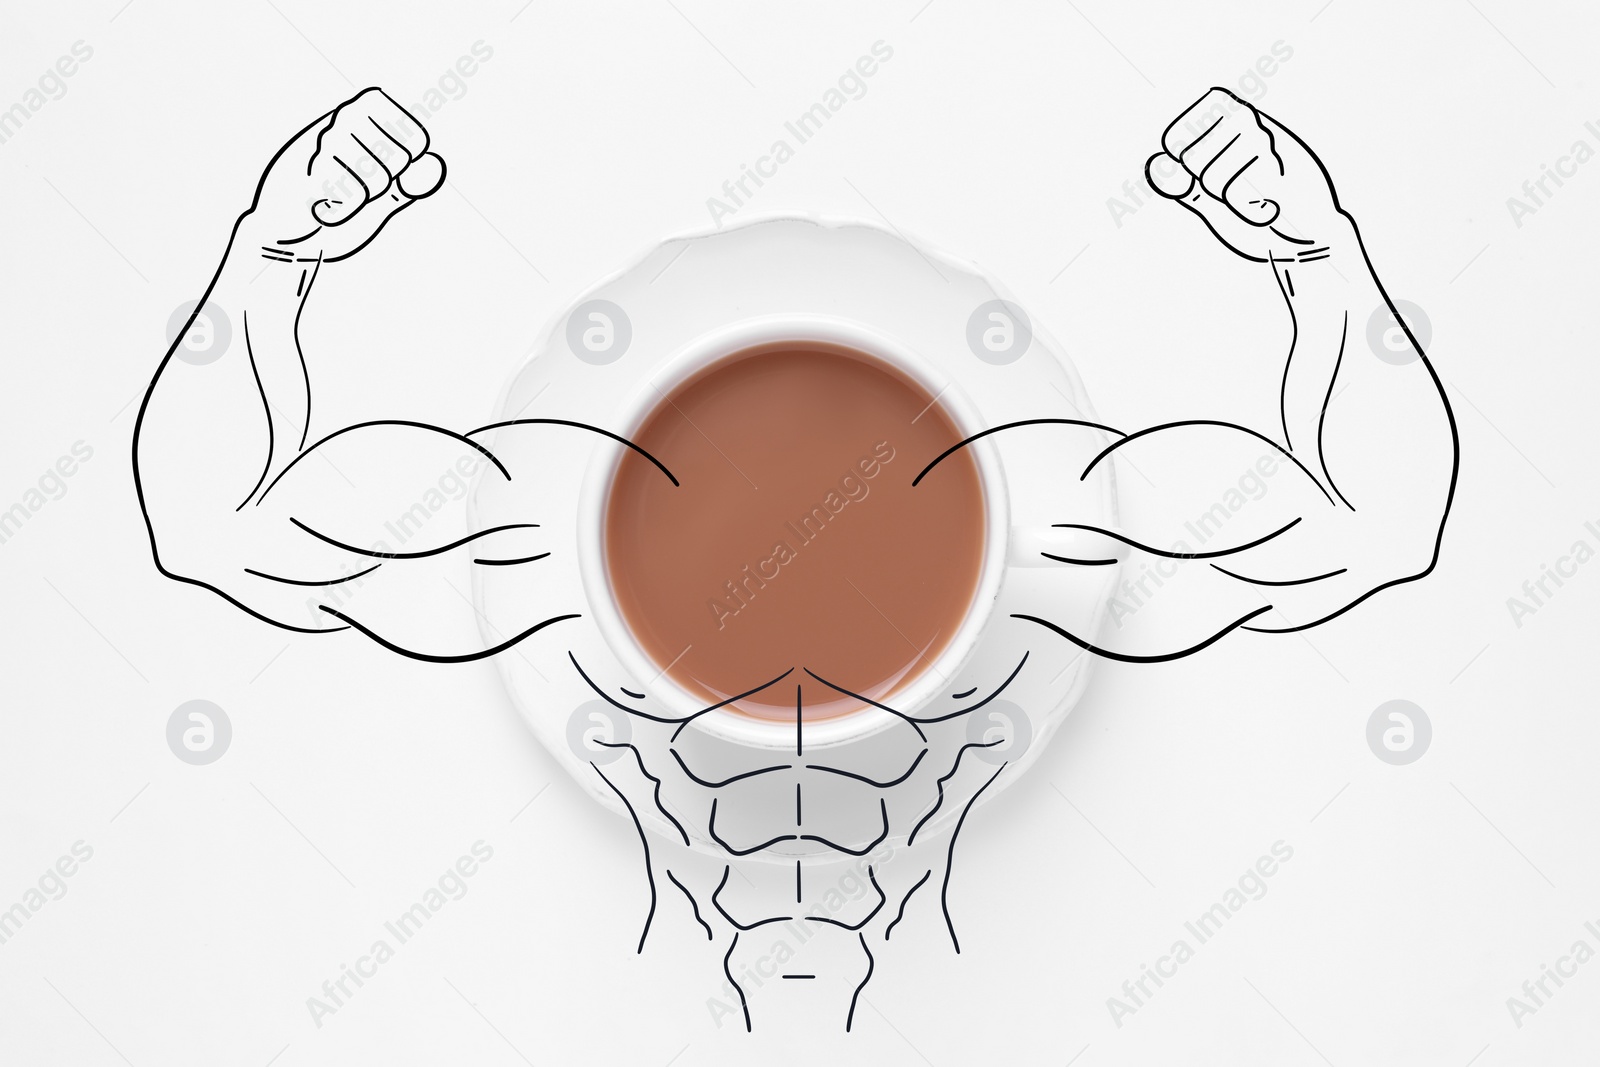 Image of Cup of tasty tea with milk and illustration of bodybuilder on white background, top view